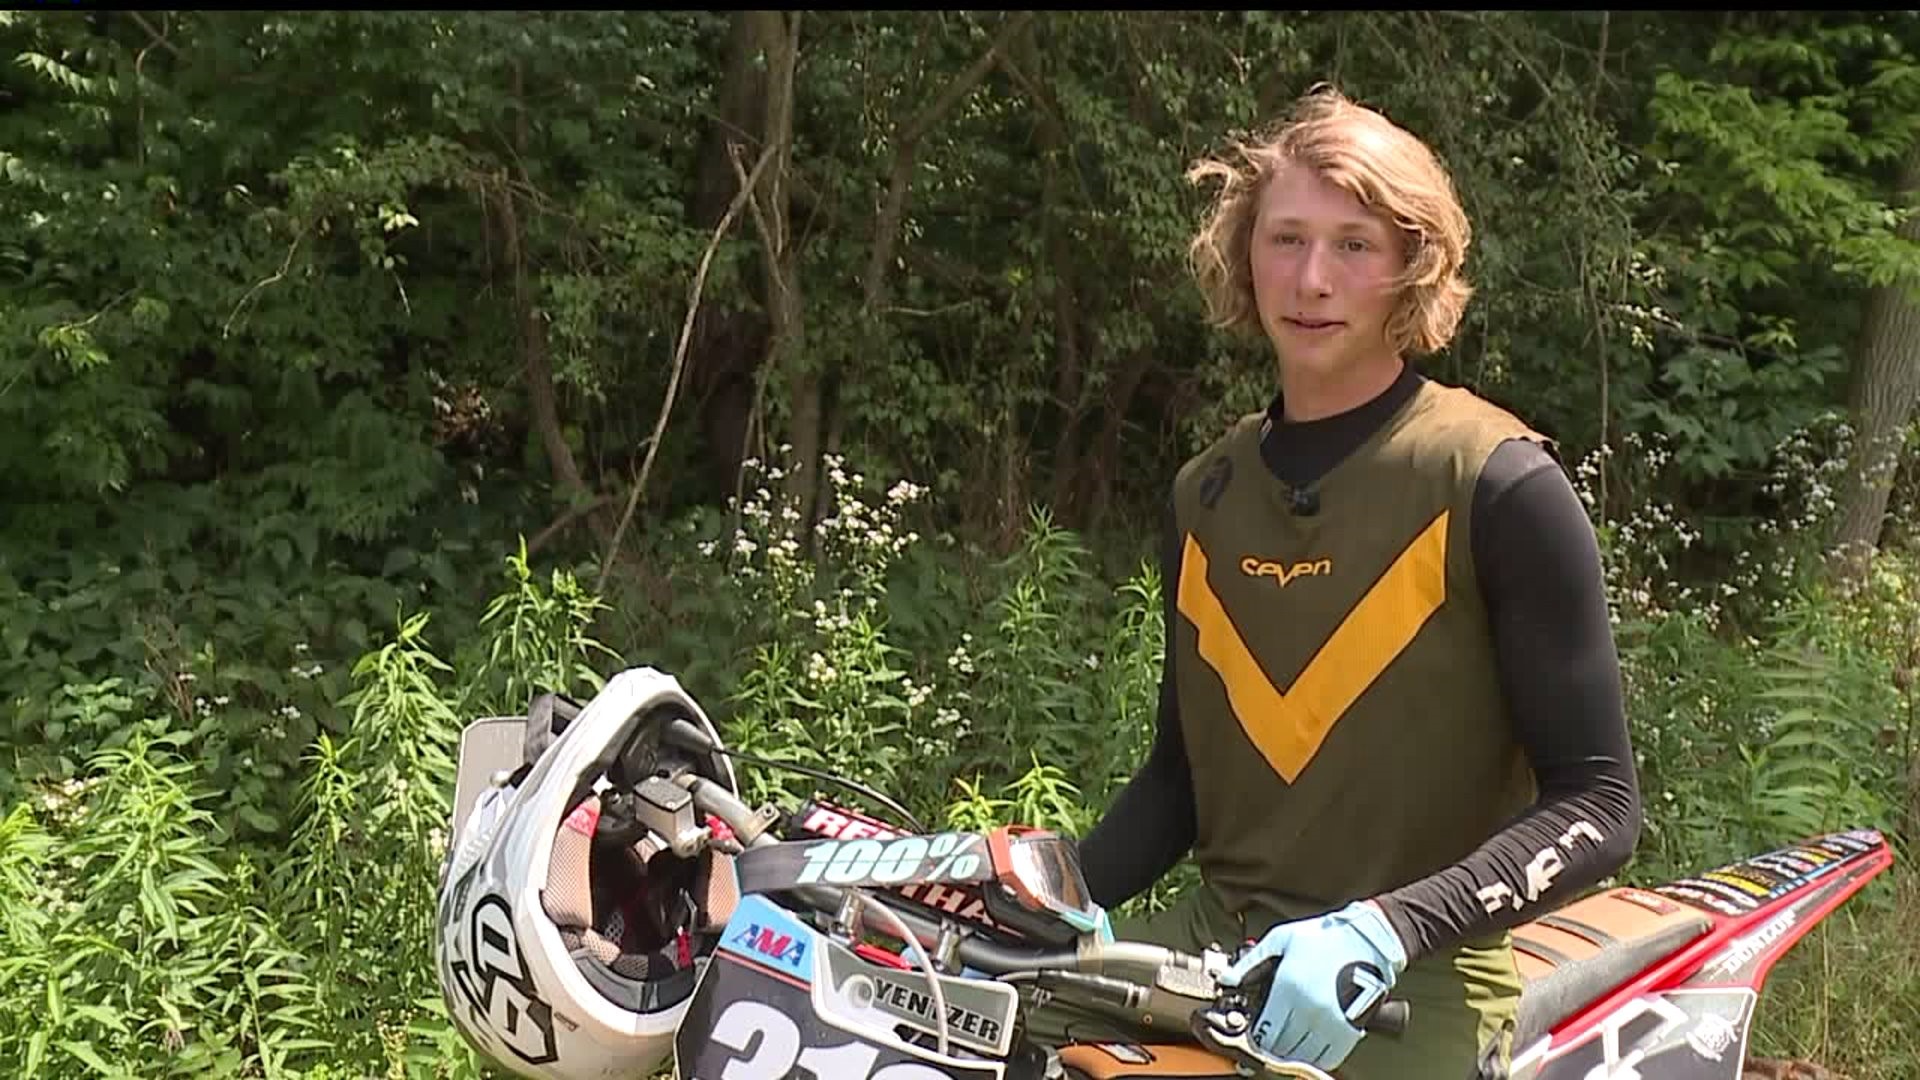 Local motocross racer has sights on Junior World Championships in Italy